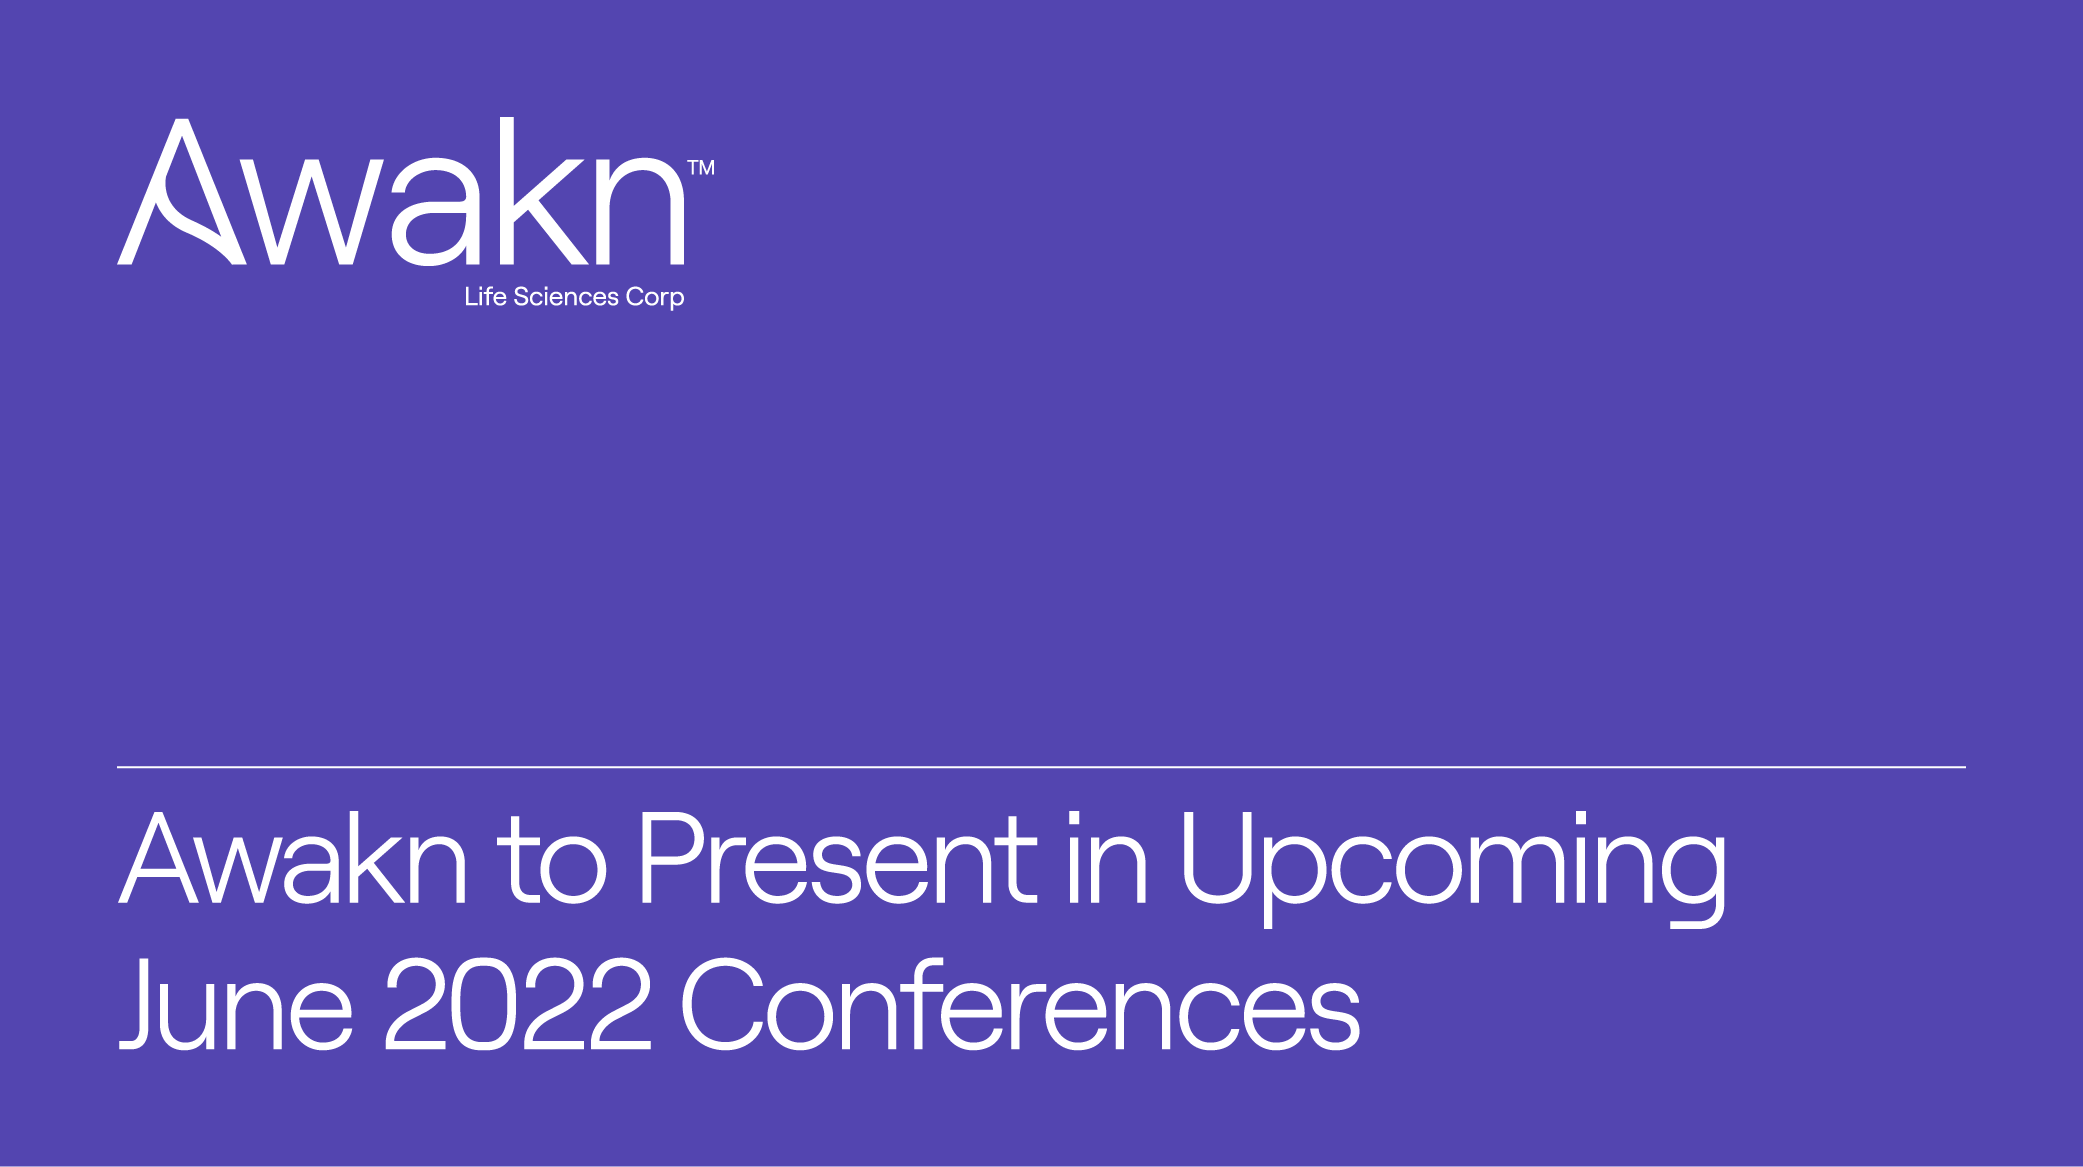 Awakn Life Sciences to Present In Upcoming June 2022 Conferences